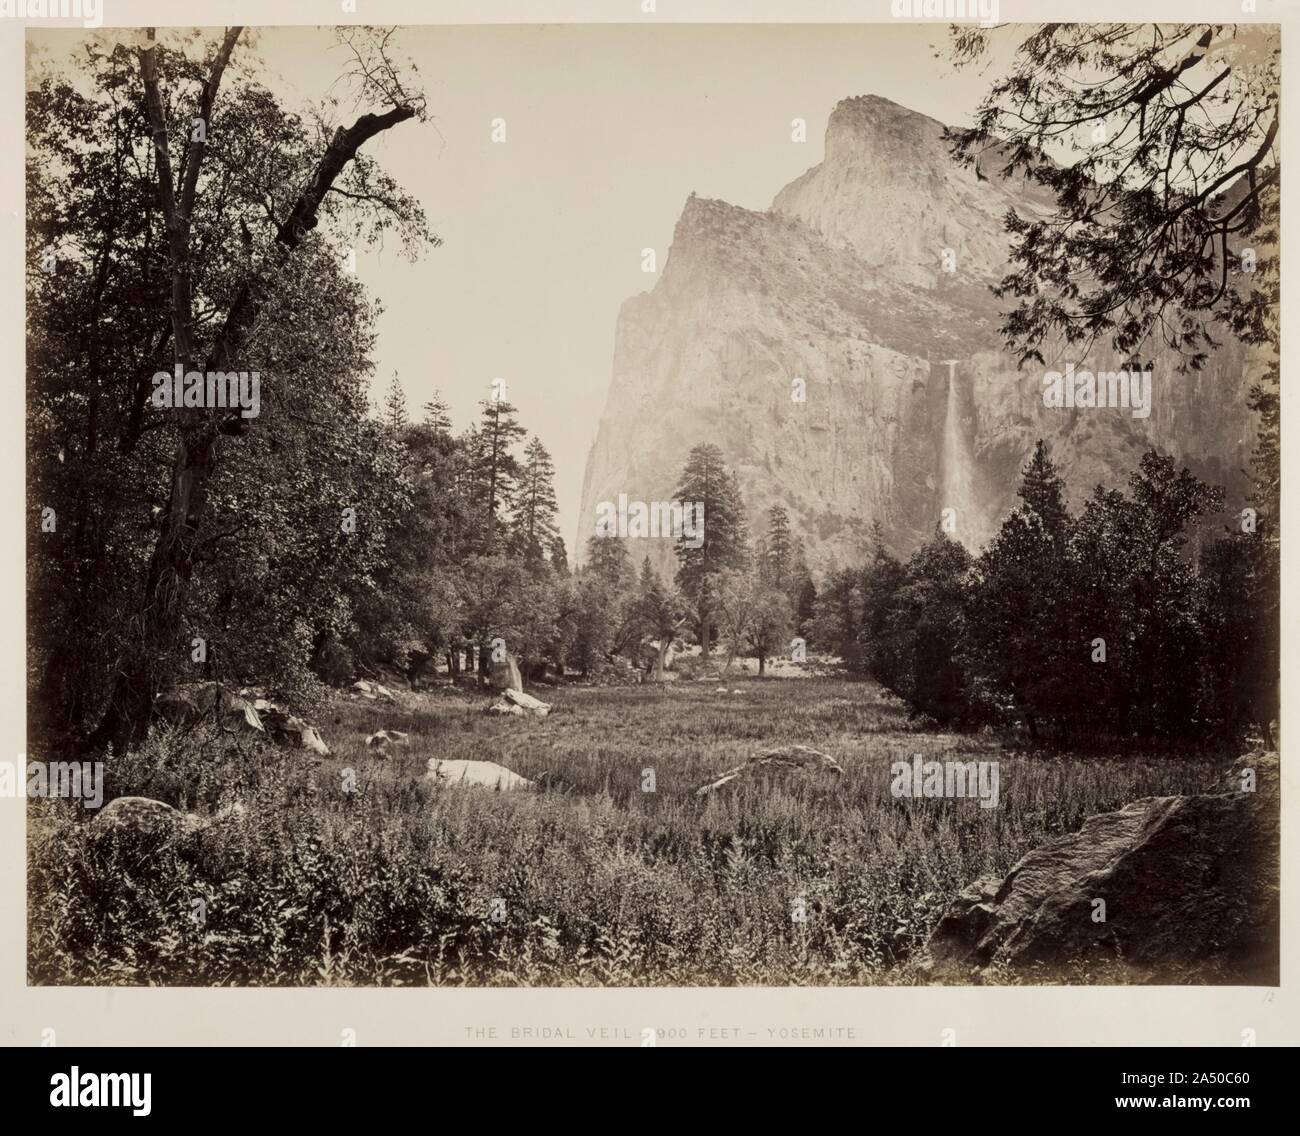 Bridal Veil, Yosemite, c. 1865-1866. In the 1850s, Carleton Watkins took up landscape as a field photographer, providing clients with views they could use to settle property disputes. He made his first trip to Yosemite in 1861 and returned many times, frequently as a member of geological surveys. This image is a remarkable example of Watkin's mammoth plate work (roughly 18 x 21 inches) in Yosemite and is among the greatest achievements in American photography. His landmark Yosemite photographs were distinguished by their early manifestation of a deliberately artistic point of view and for thei Stock Photo